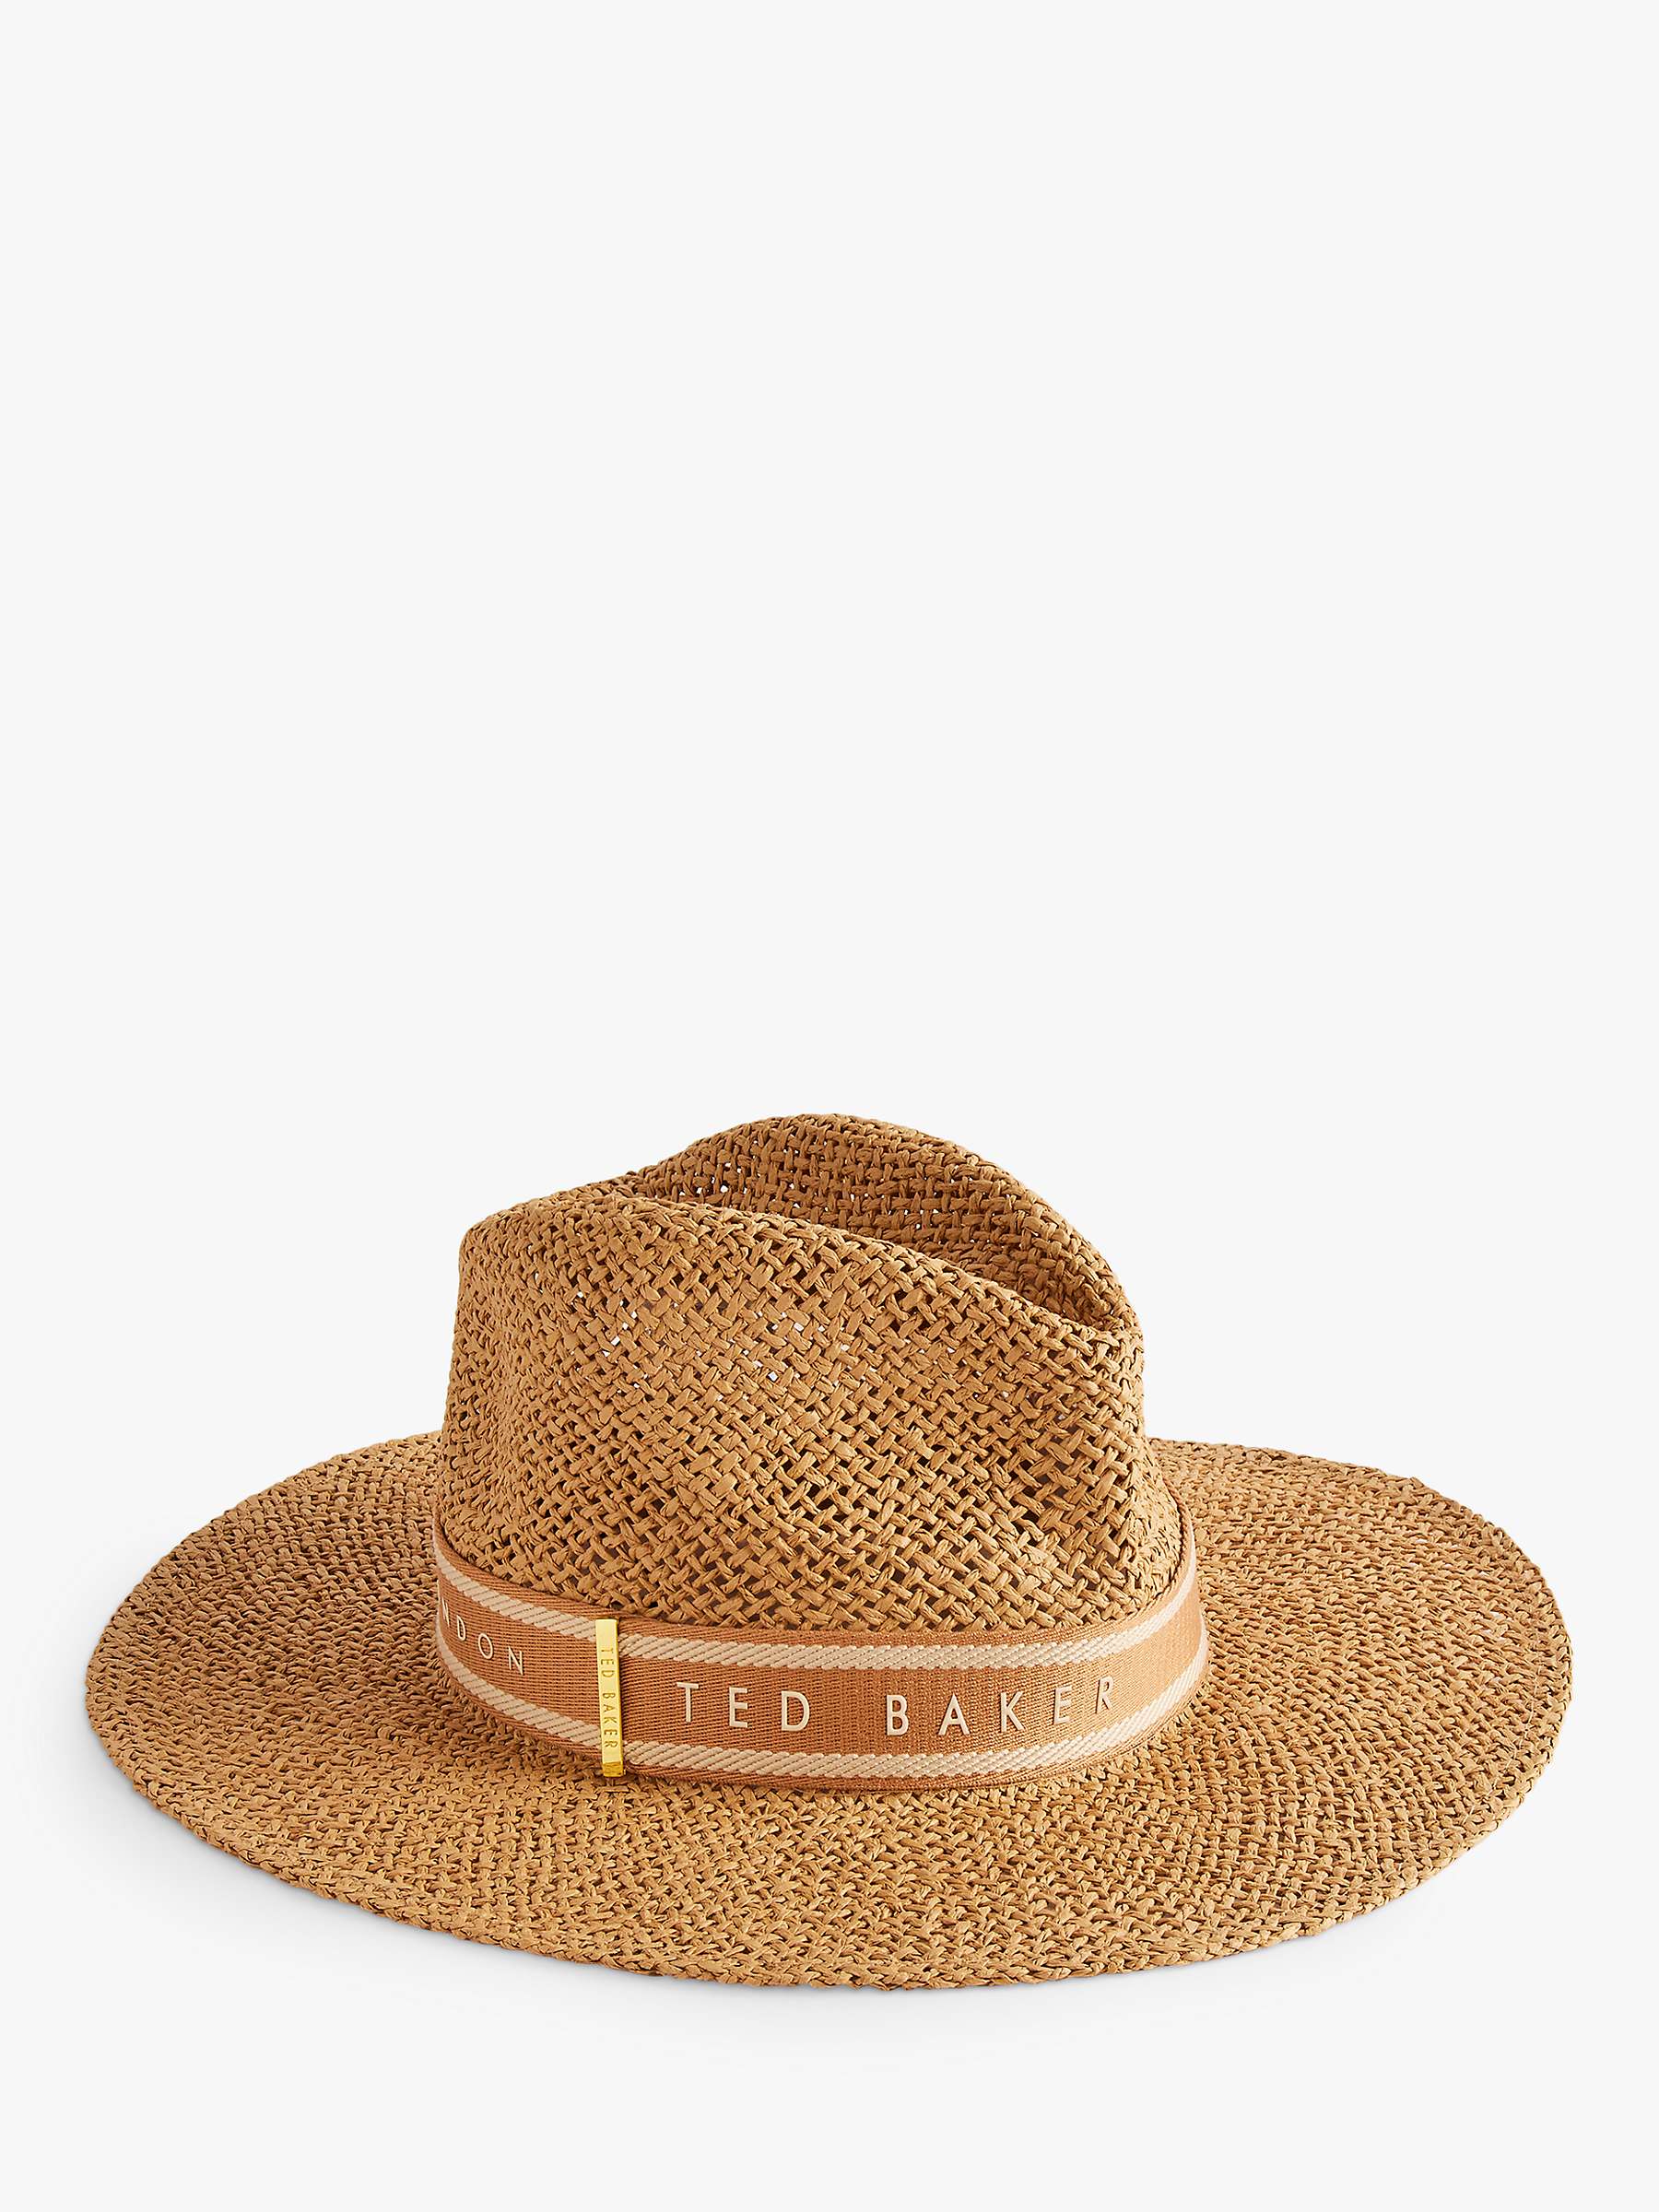 Buy Ted Baker Clairie Straw Fedora Hat Online at johnlewis.com